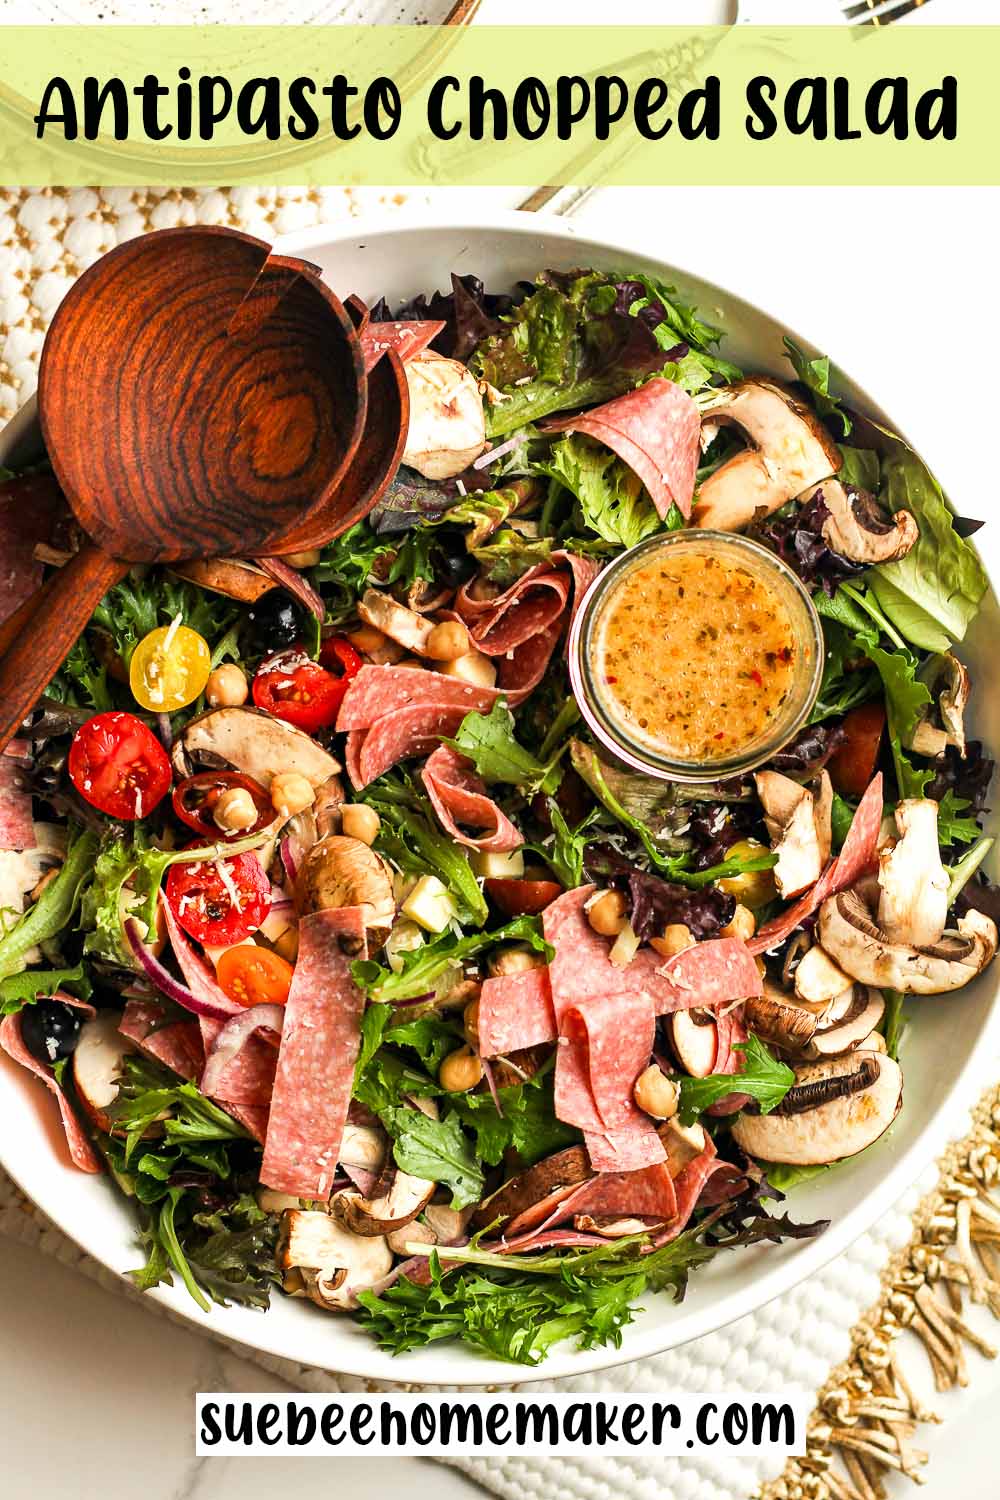 A large bowl of an antipasto chopped salad.